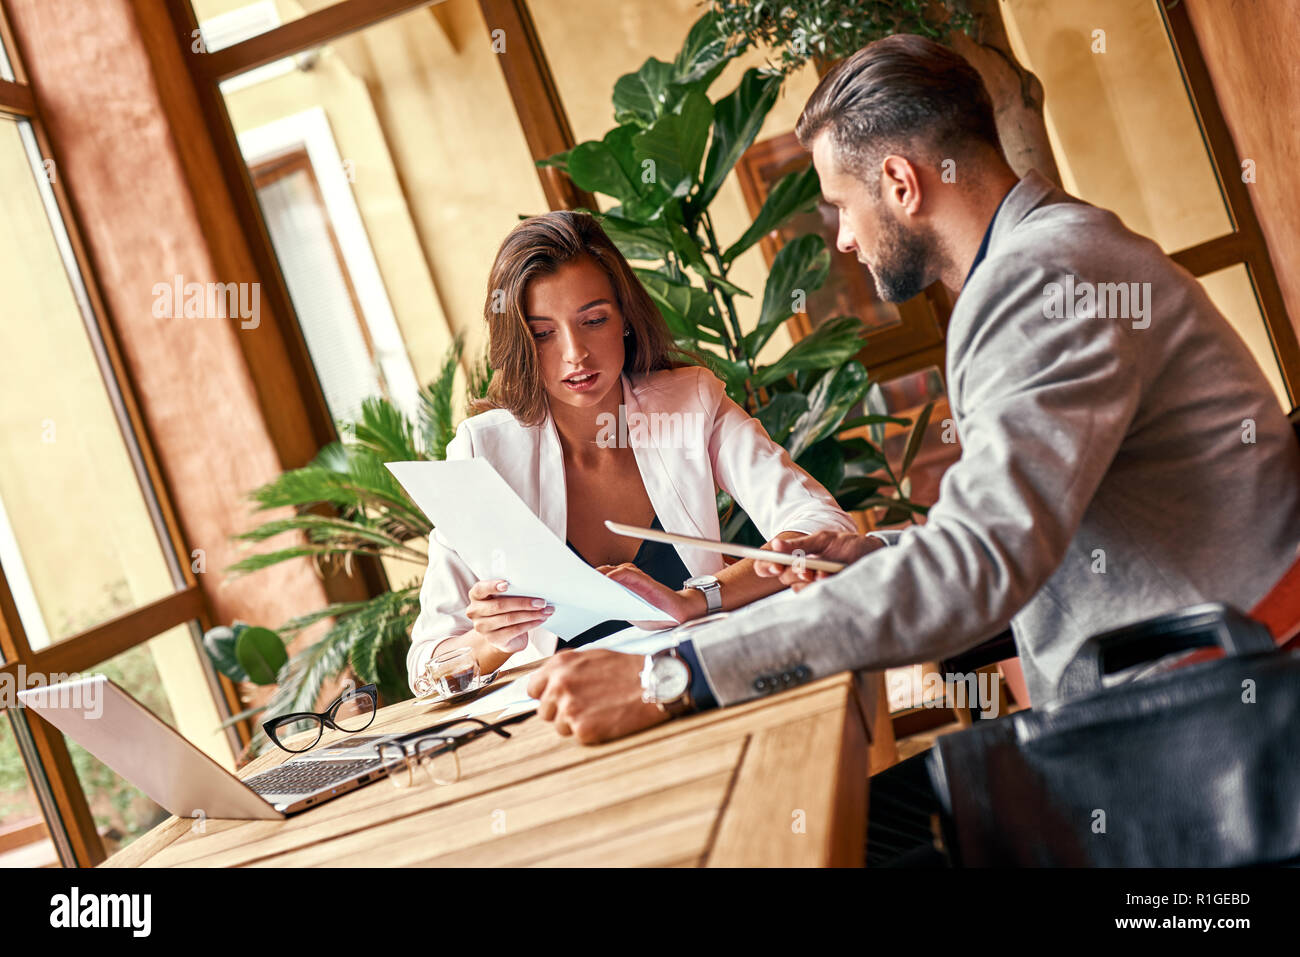 Business lunch. Business people sitting at table at restaurant woman explaining project idea to man holding digital tablet Stock Photo